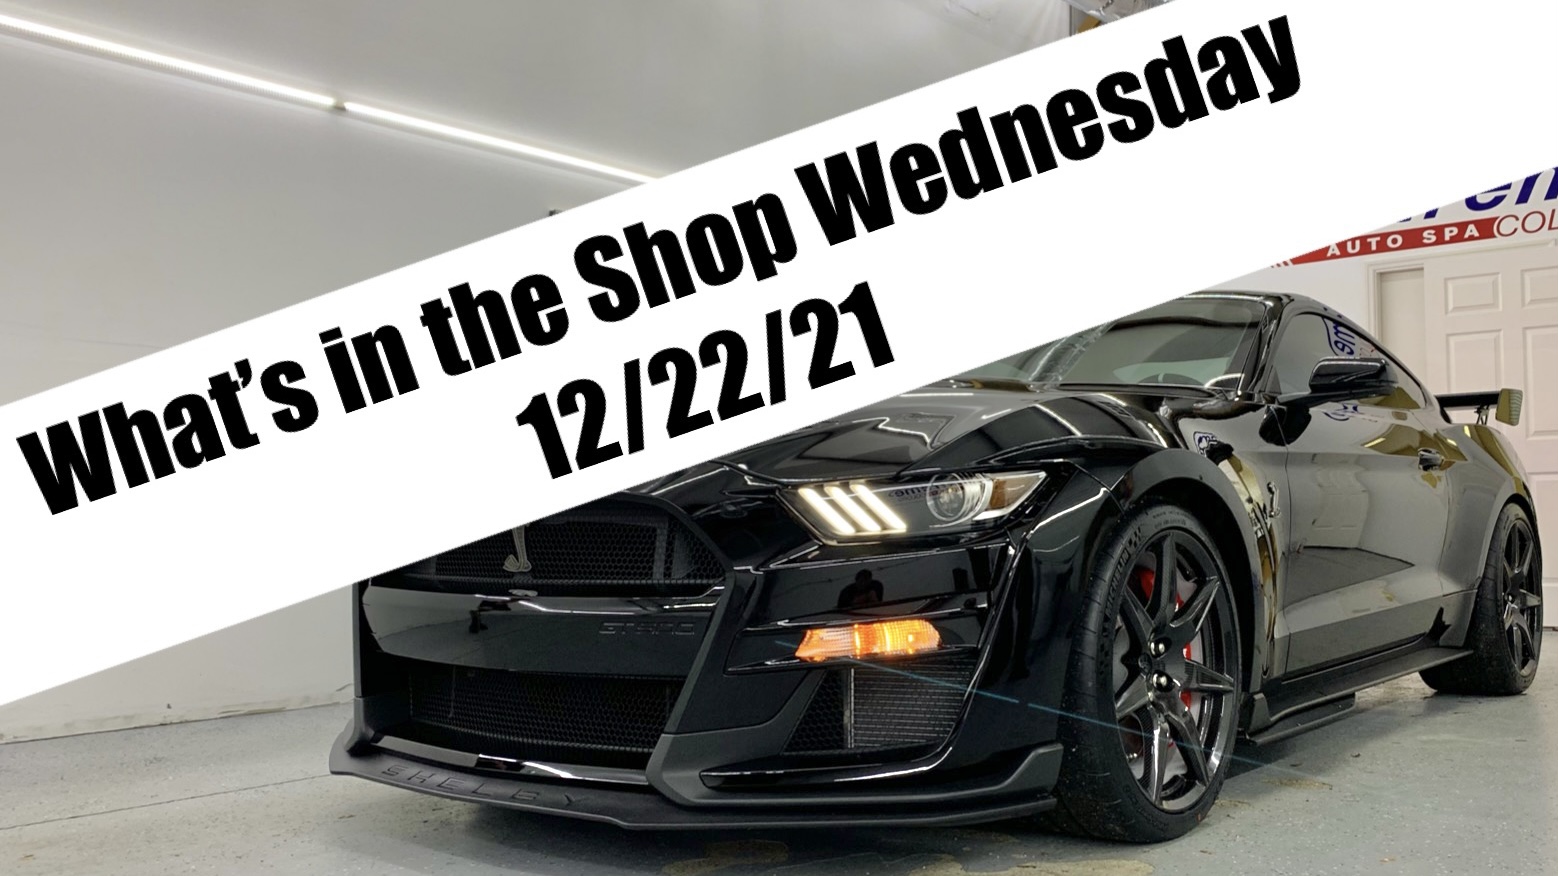 What’s in the Shop Wednesday 12/22/21